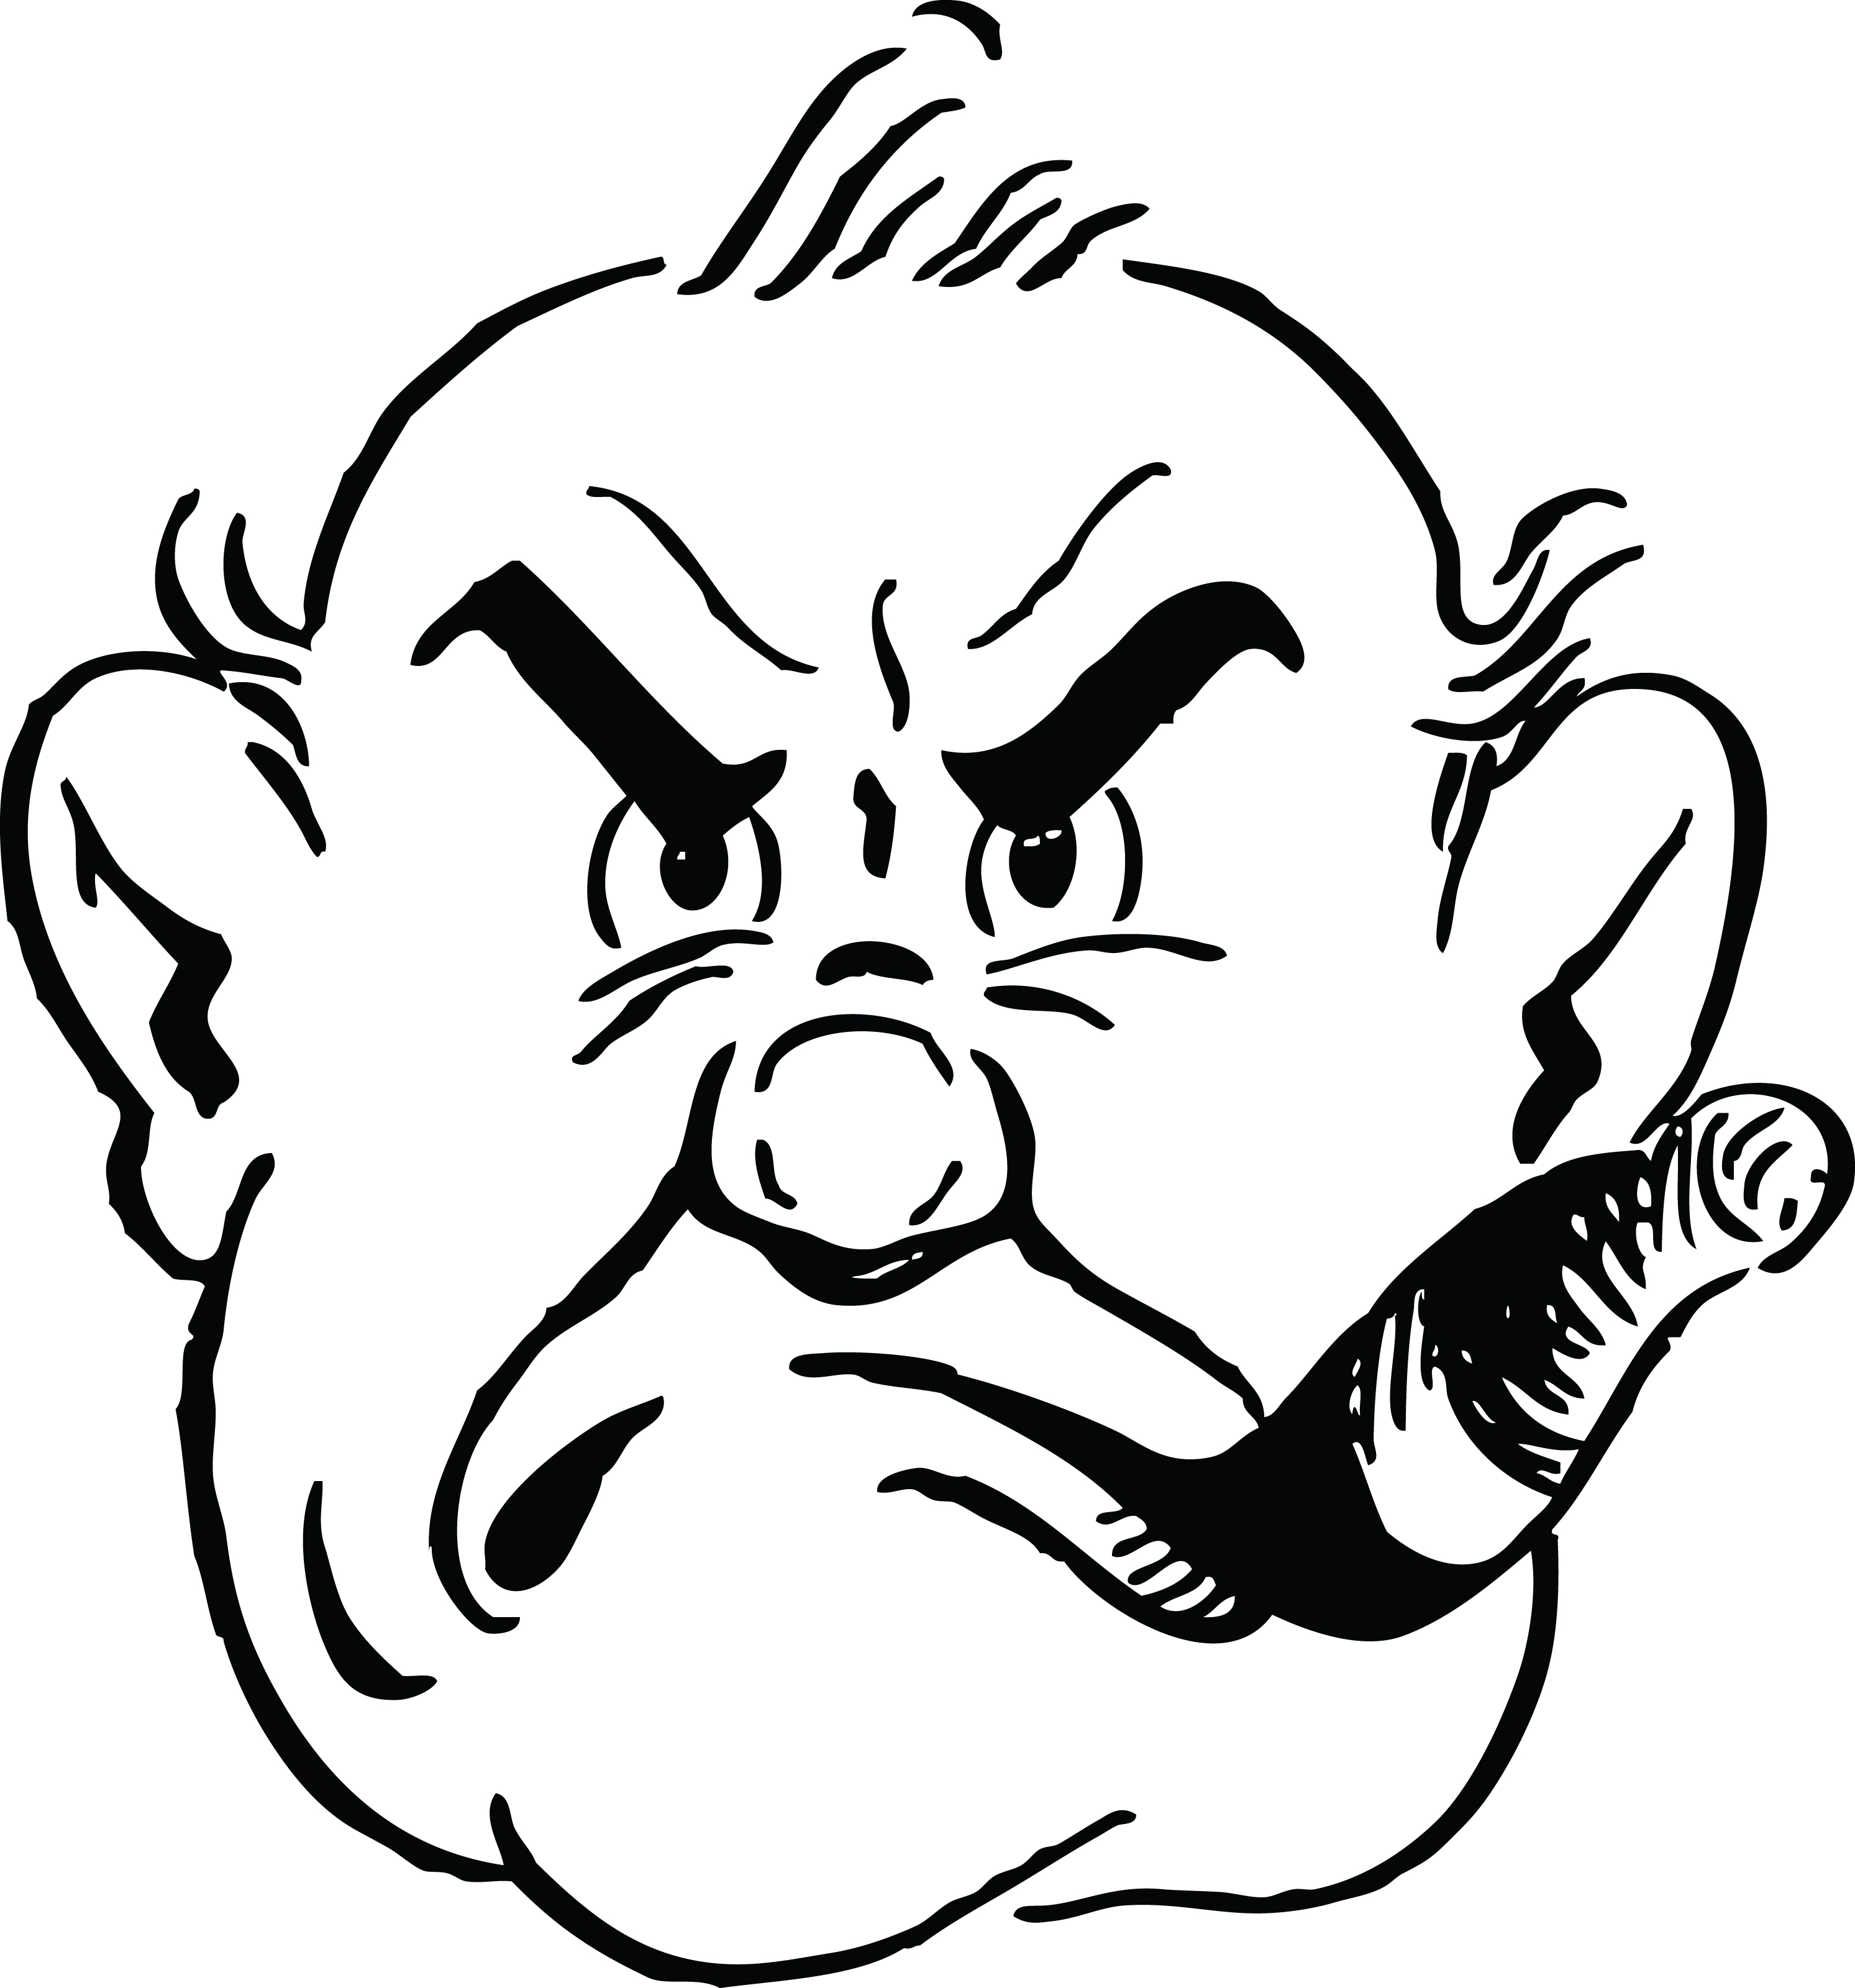 mad clipart evil guy